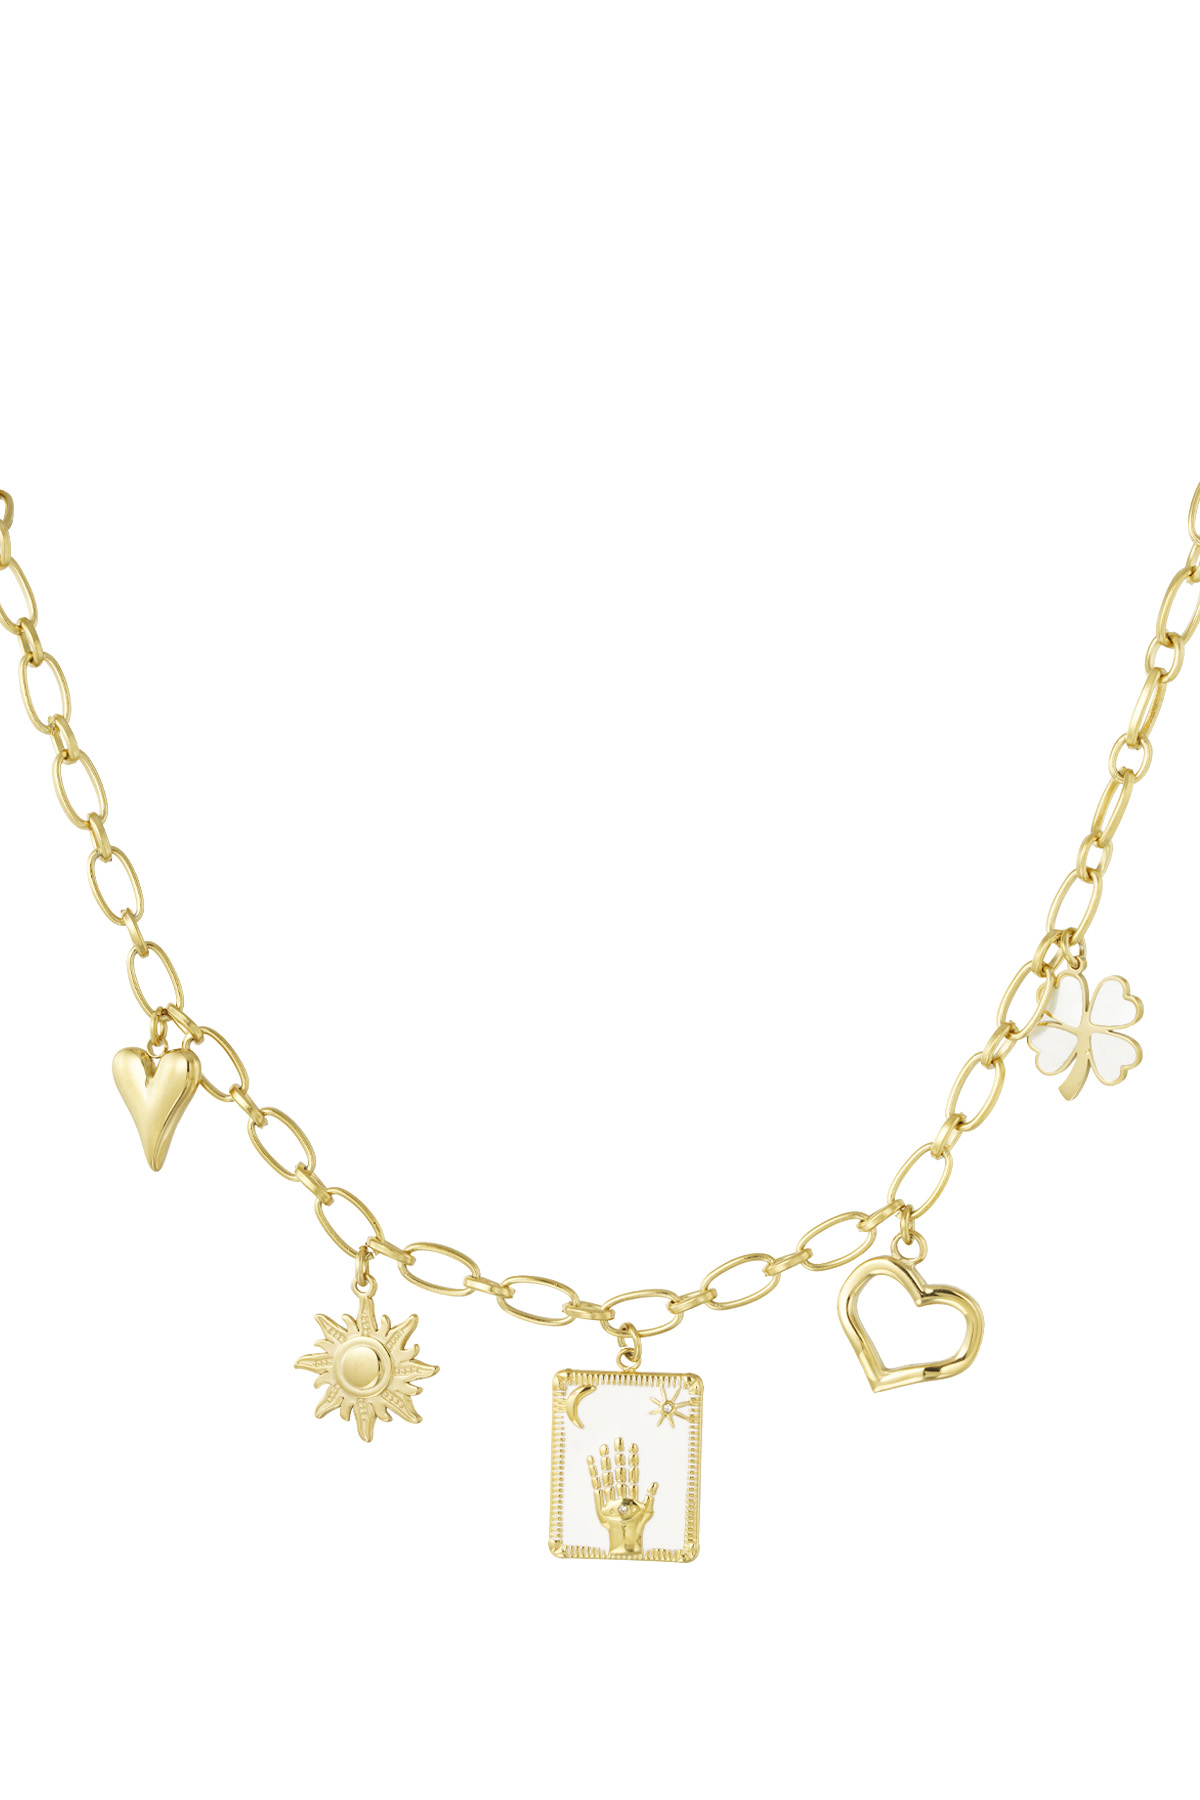 Charm necklace raise your hand - gold